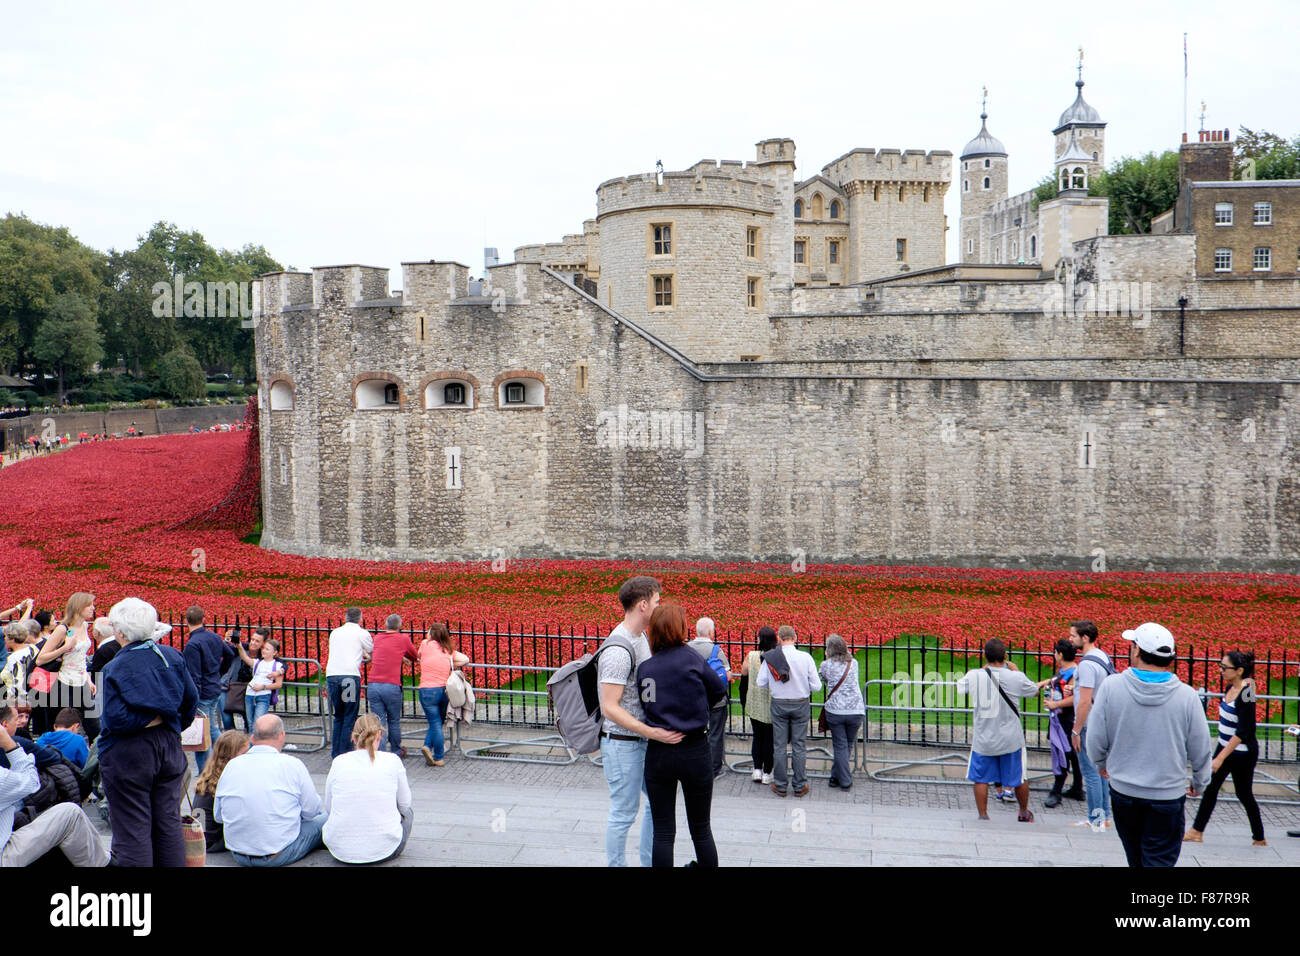 Dotted with artistic red poppies, the Tower of London is being prepared for Rememberance Day, in honor of lives lost in WWI. Stock Photo